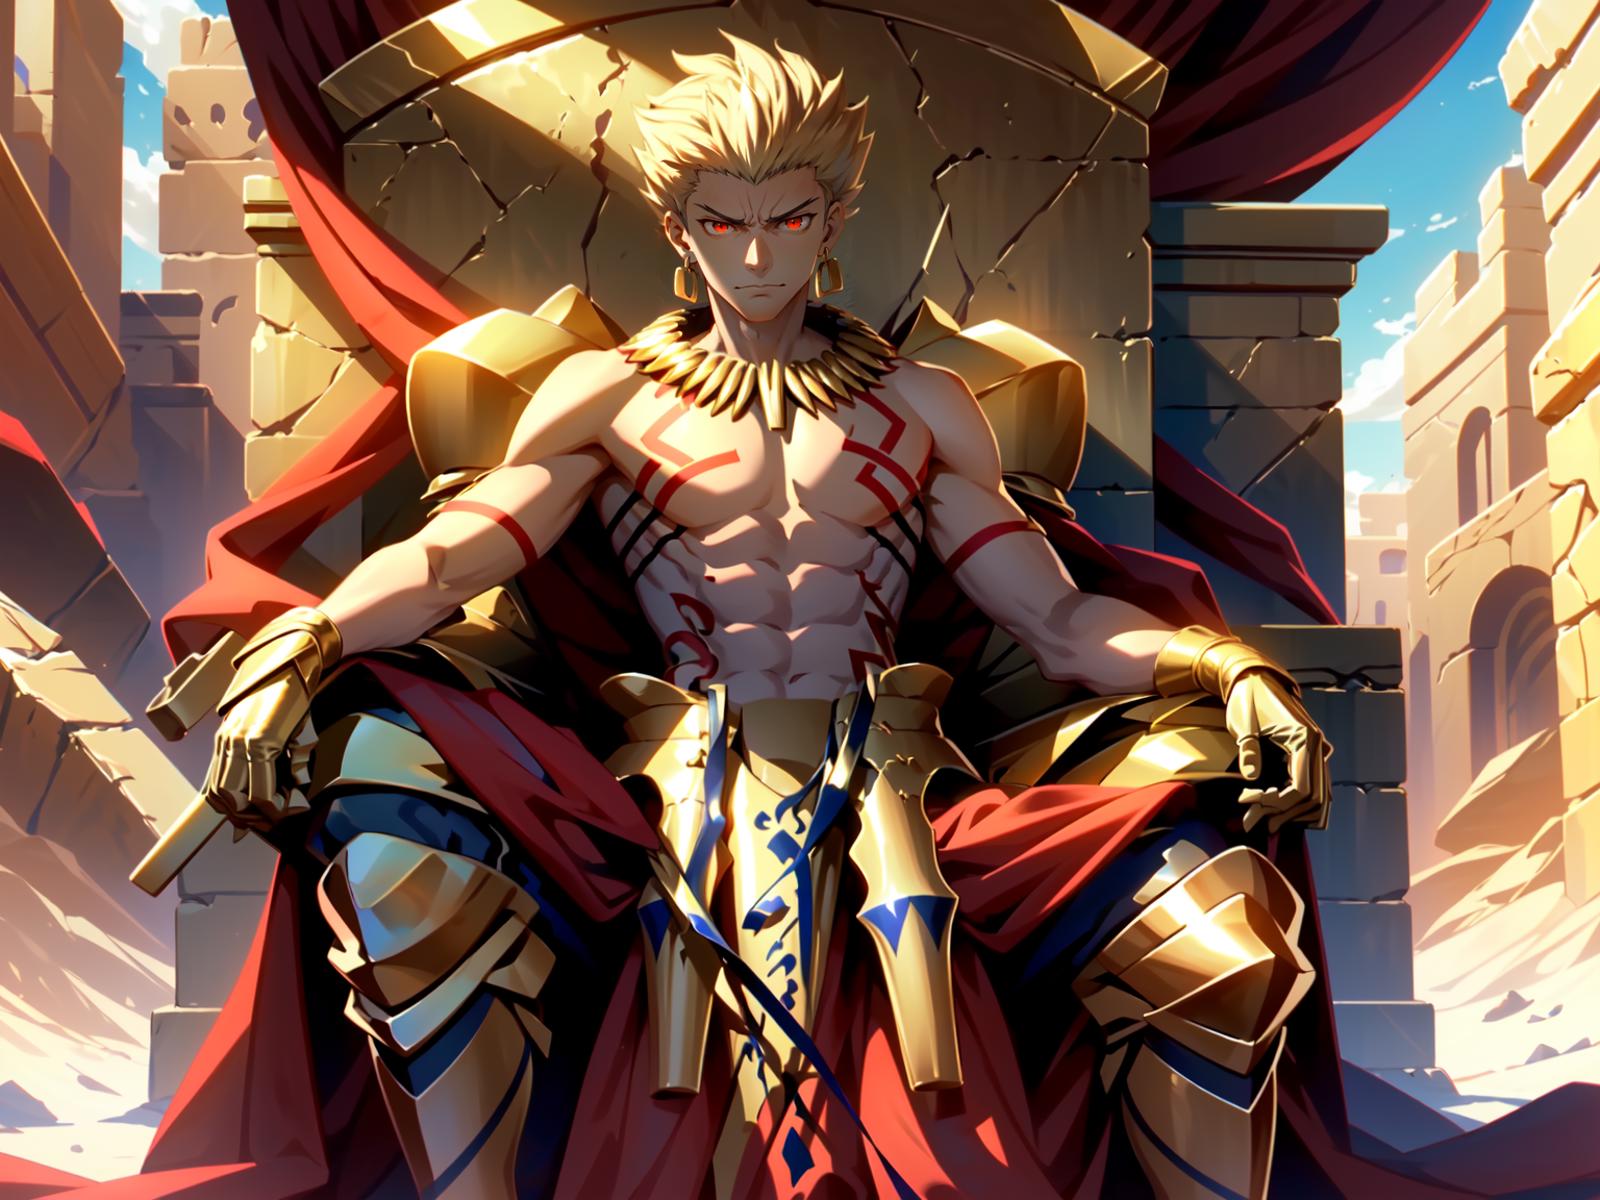 Gilgamesh - The King of Heroes | Fate | FGO image by VagueDustin